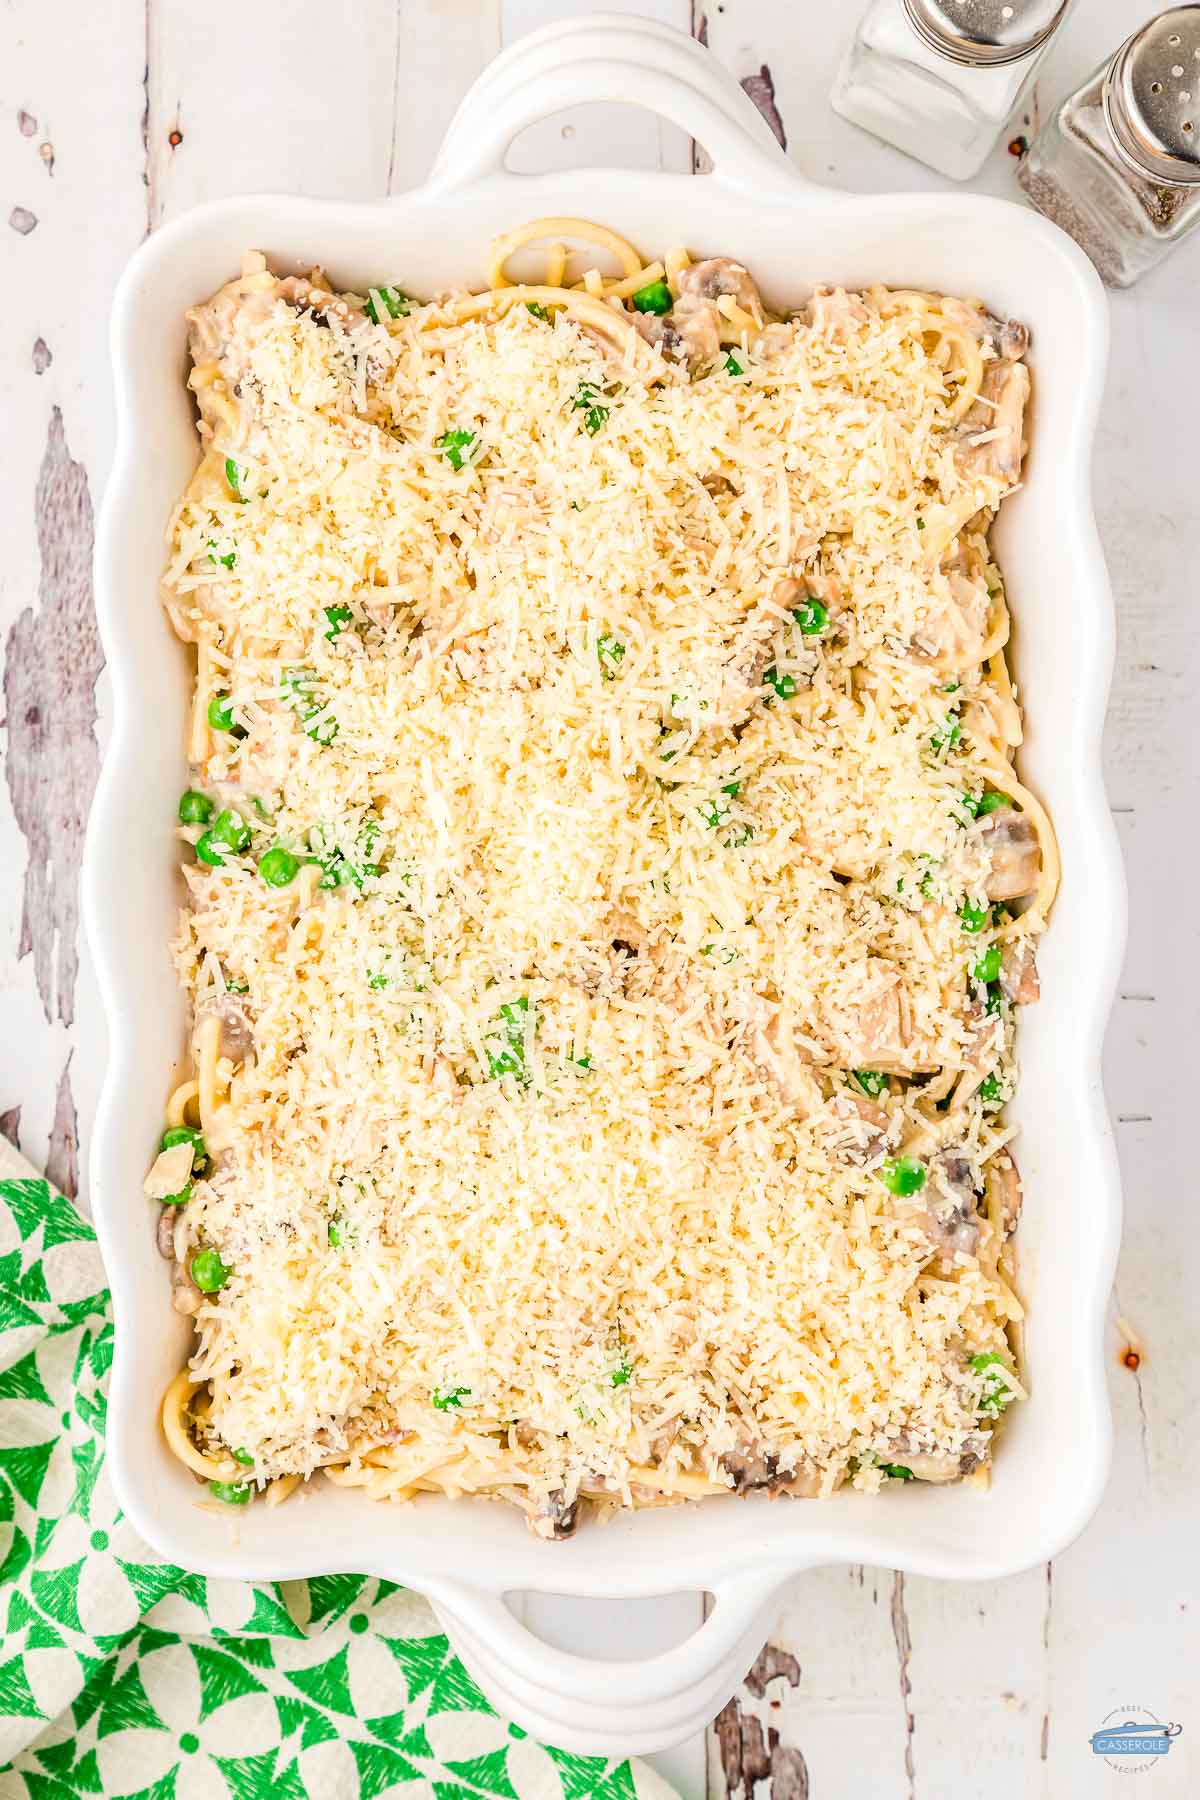 you can use soy ingredients in this casserole